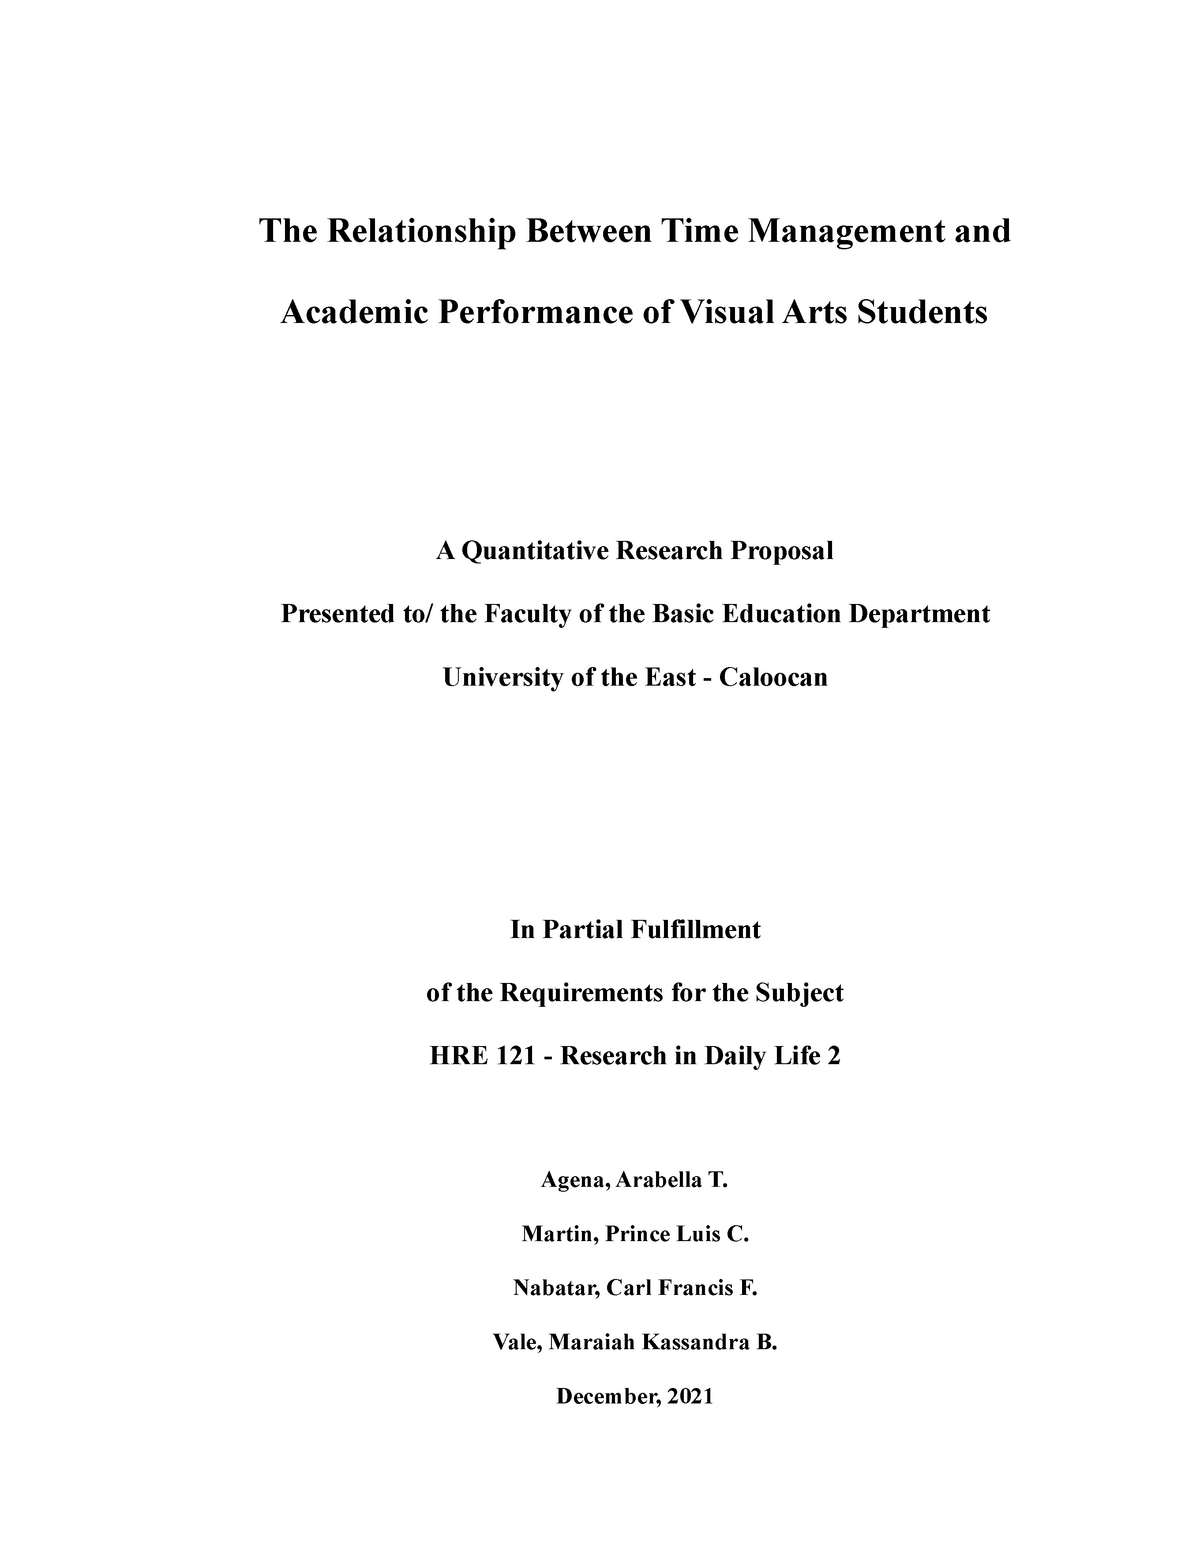 time management and academic performance thesis pdf